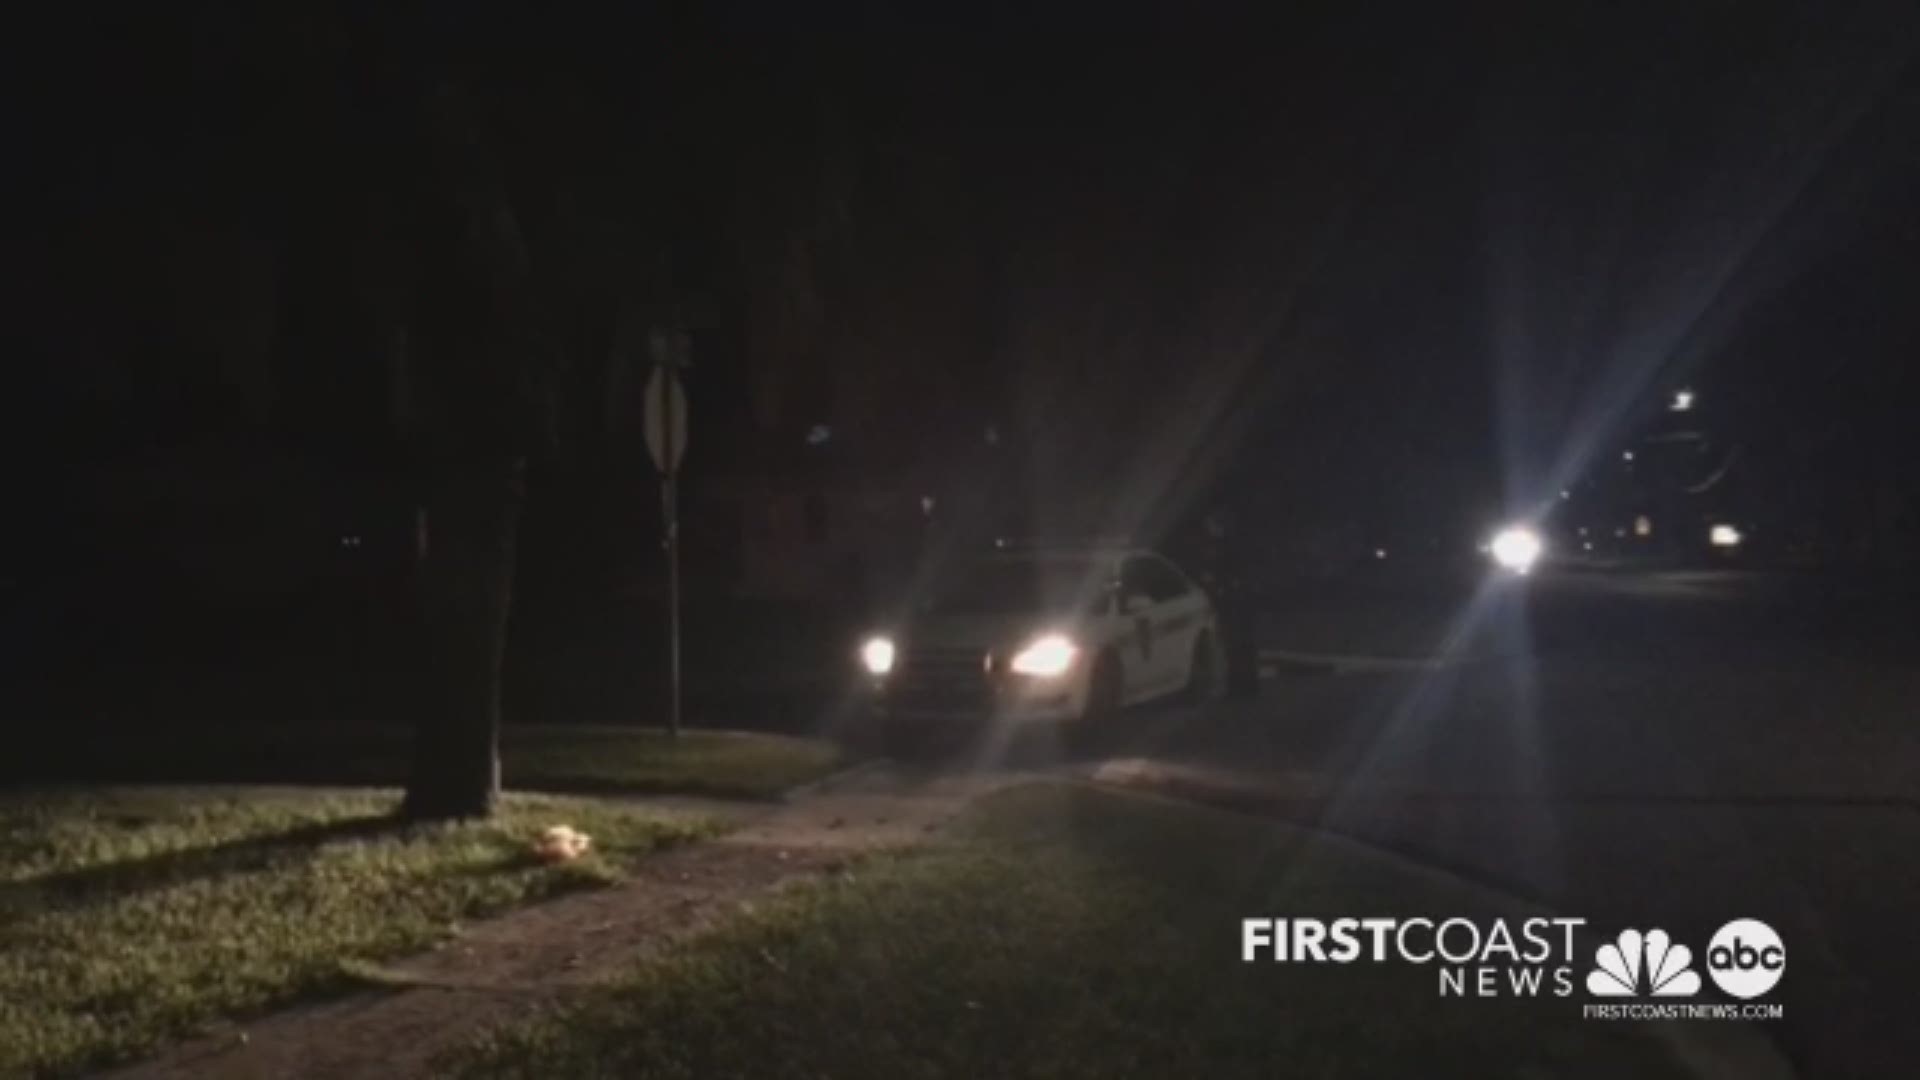 Police are conducting a criminal investigation in the 103rd Street area in Jacksonville's Westside Monday night, according to a tweet from the Jacksonville Sheriff's Office.